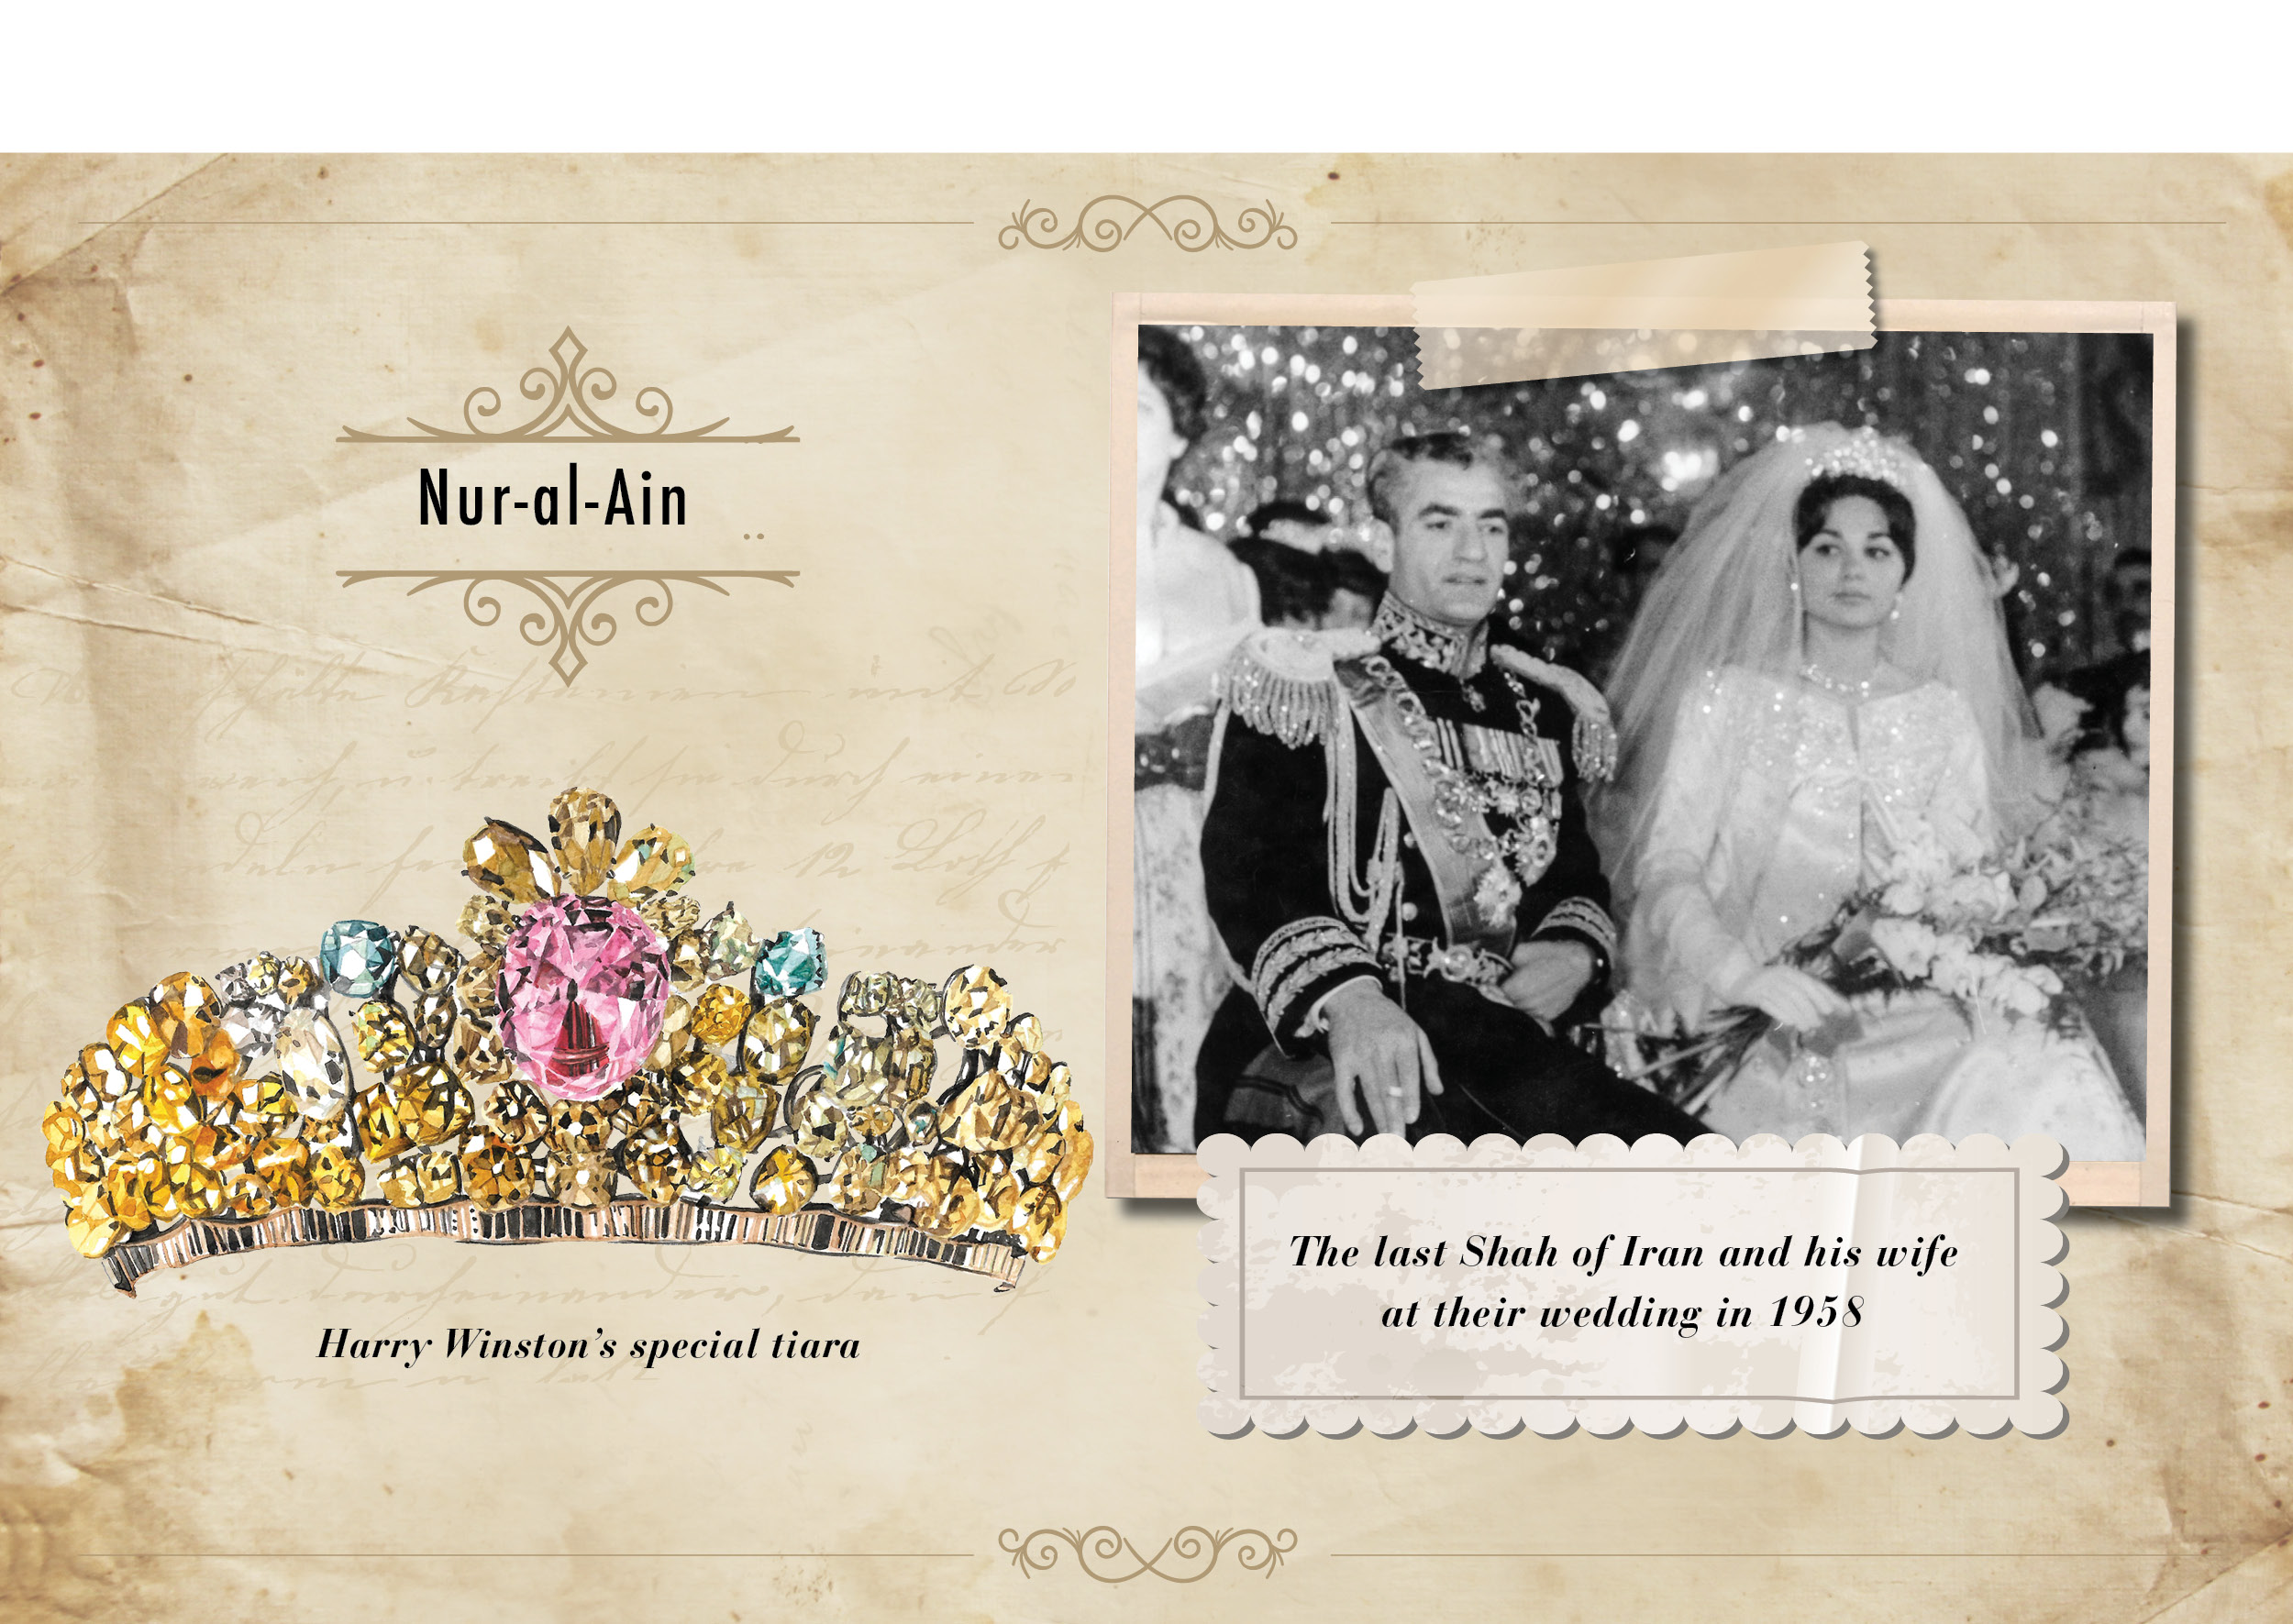 The Last Shah of Iran and His Wife on Their Wedding Day in 1958